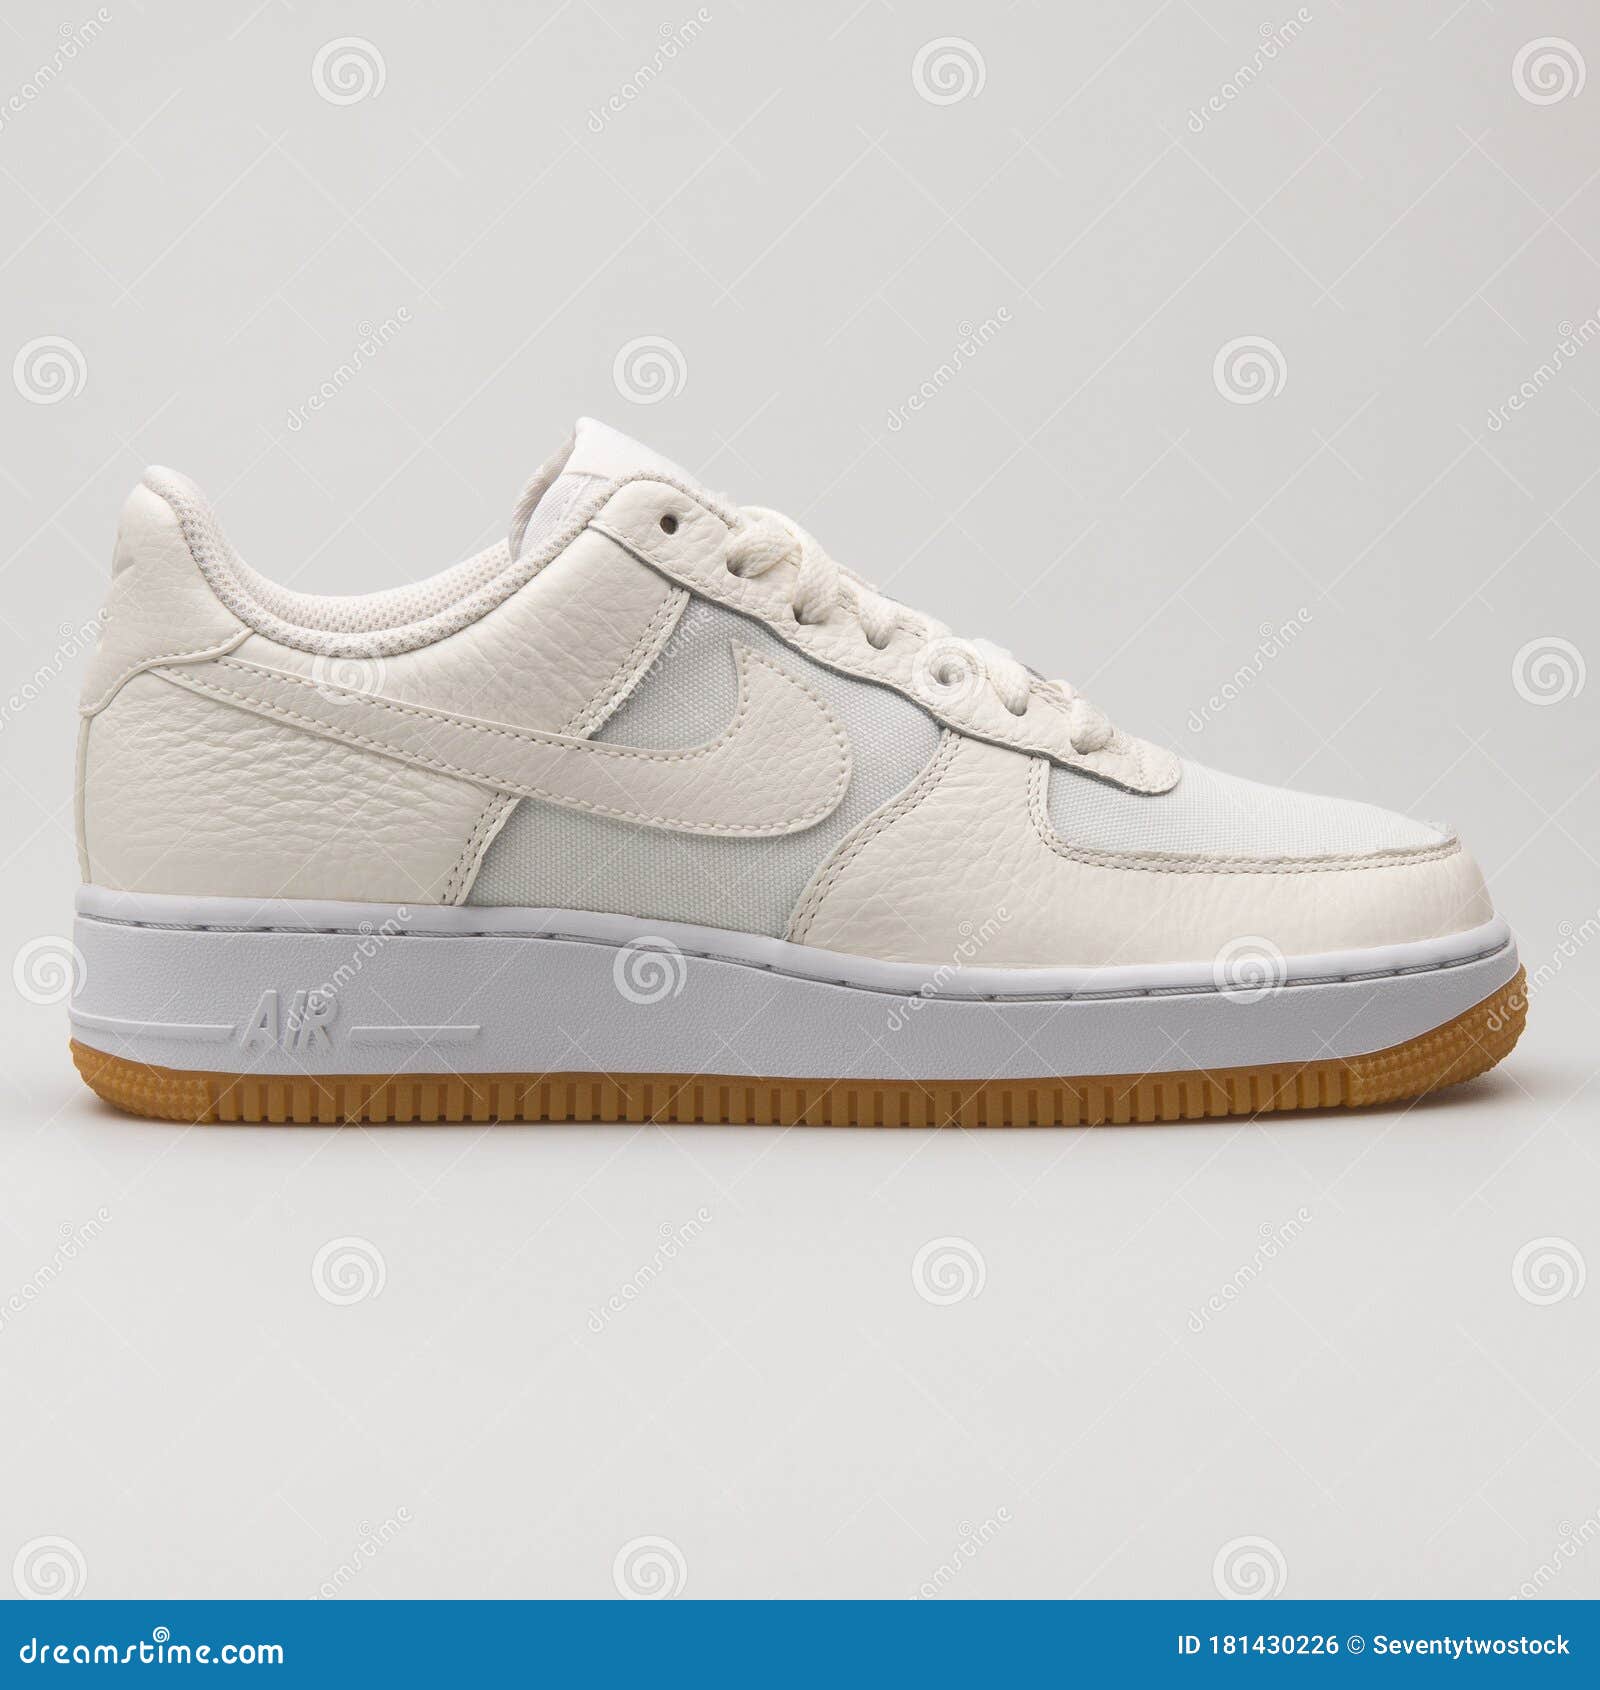 Nike Air Force 1 07 Premium Sail and White Sneaker Editorial Photo - Image  of lifestyle, life: 181430226